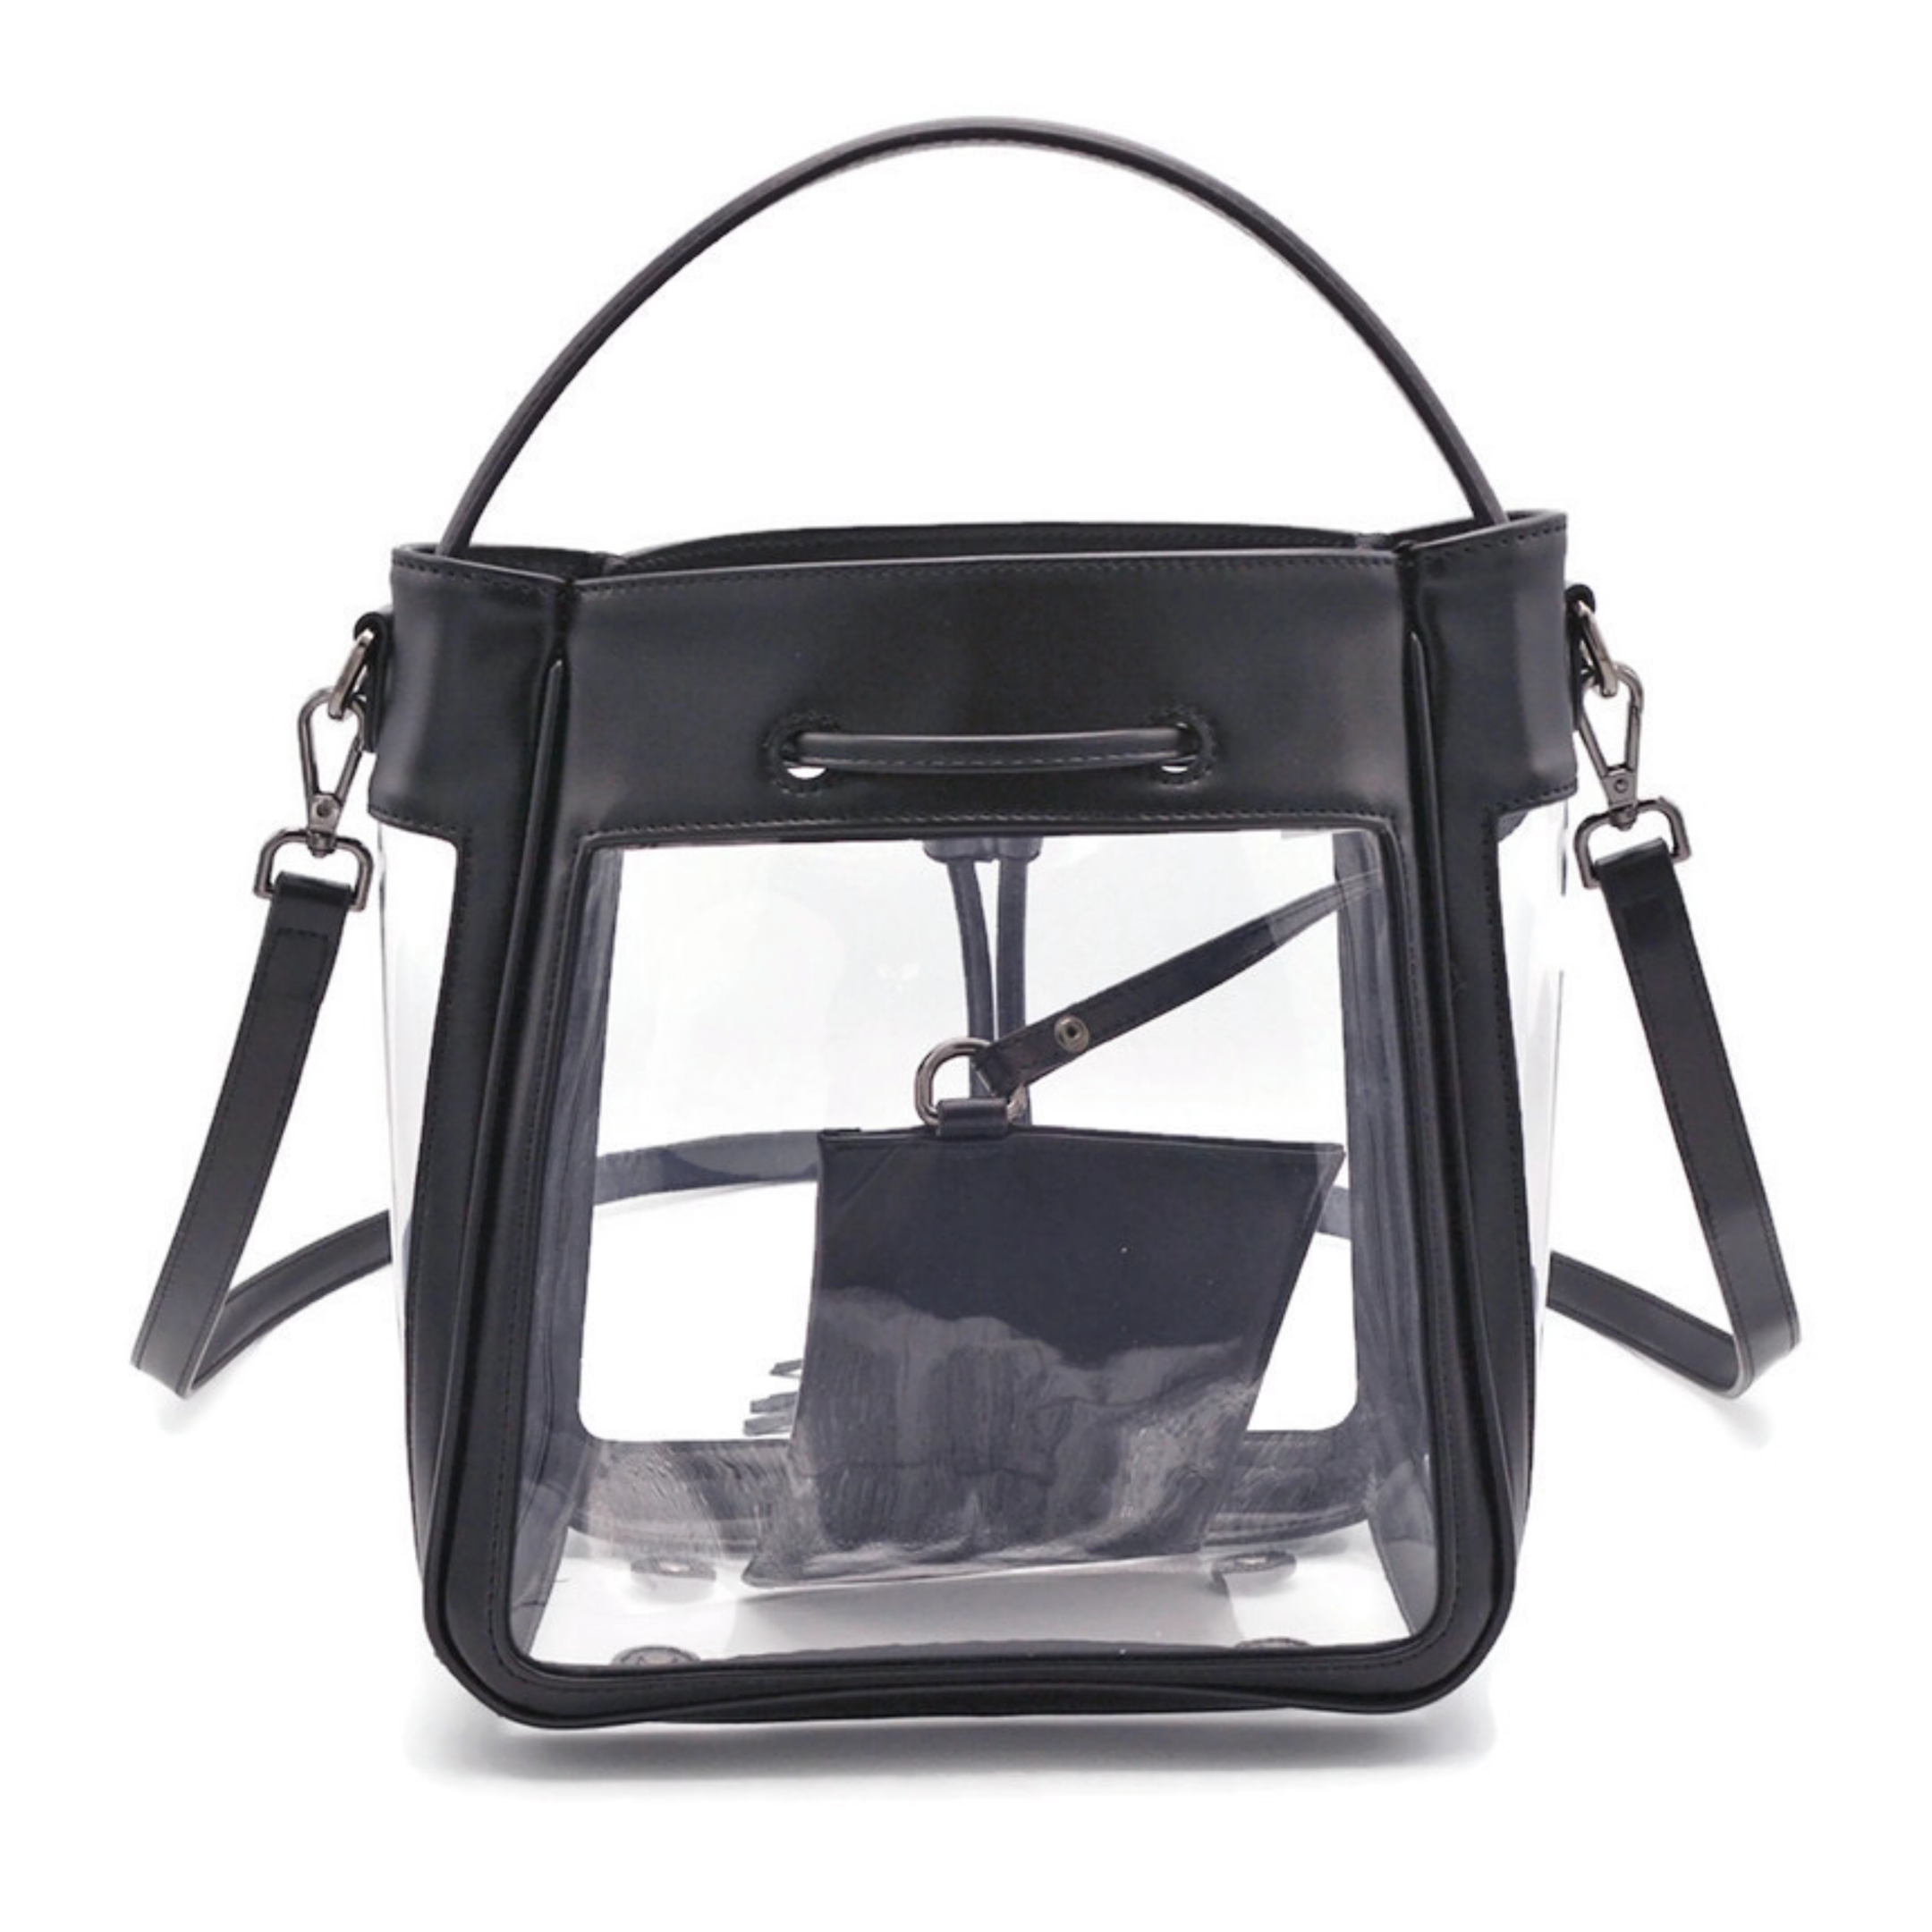 The Bare Bucket | Classic Black | Policy Handbags | Clear Bag Policy ...